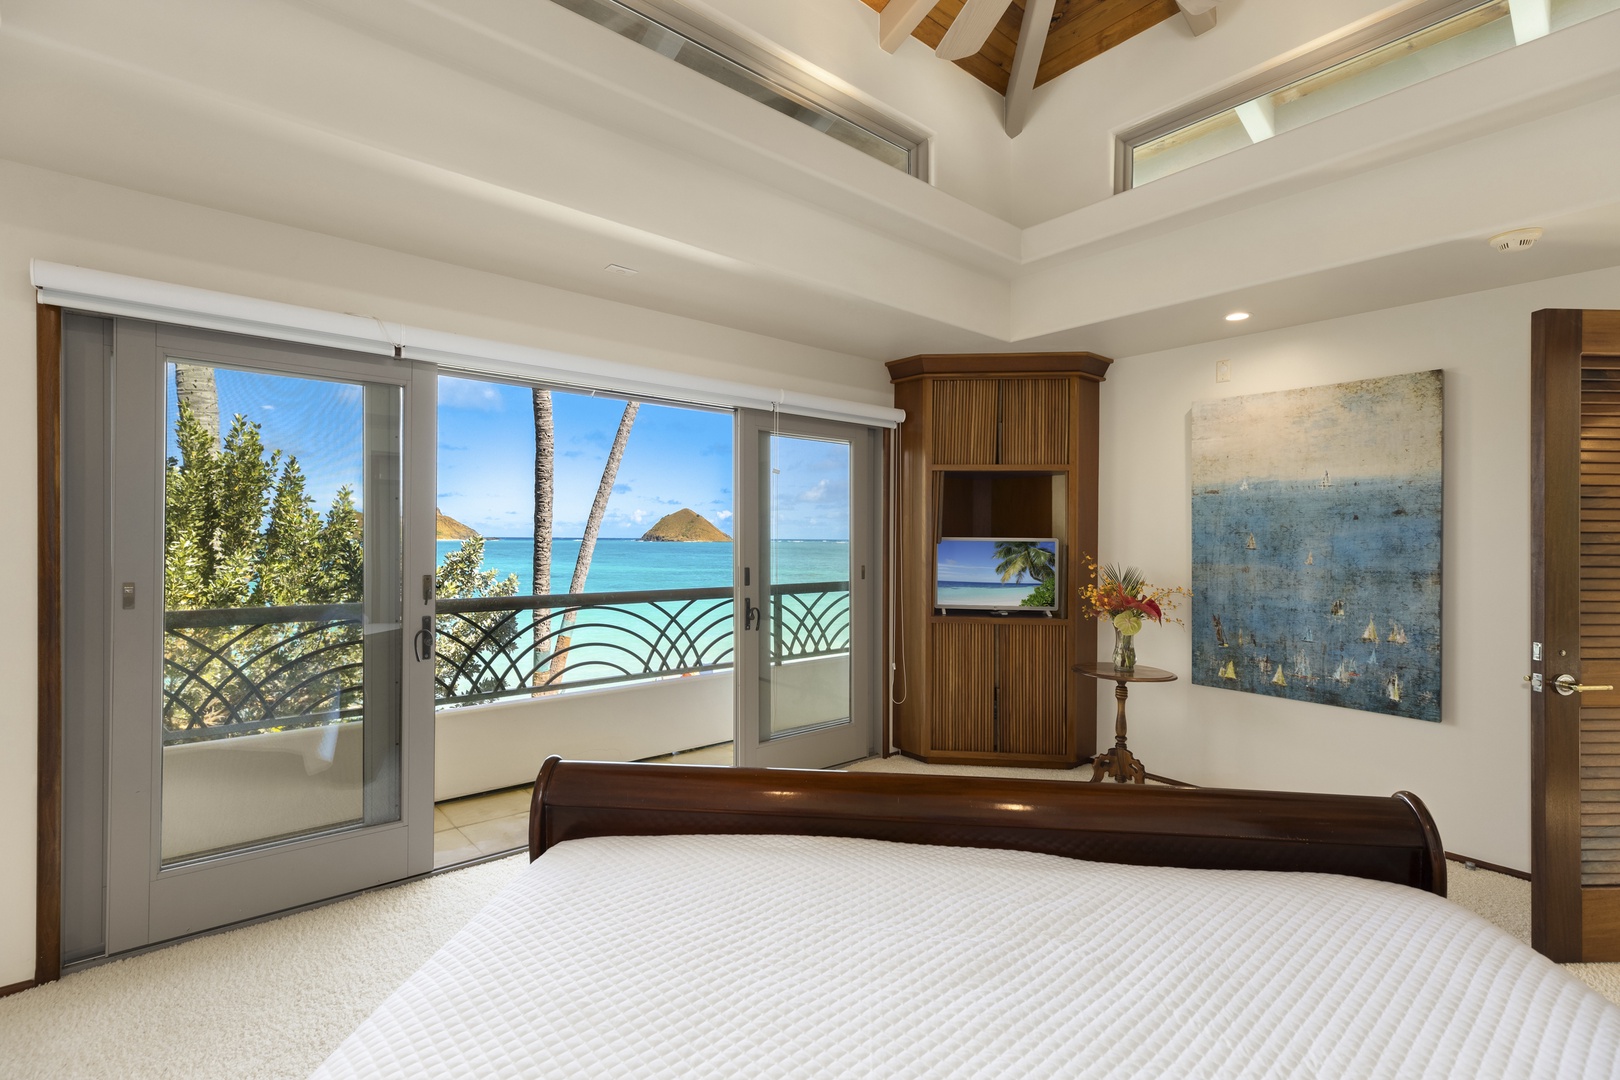 Kailua Vacation Rentals, Mokulua Sunrise - Wake up to this view in the Primary Suite